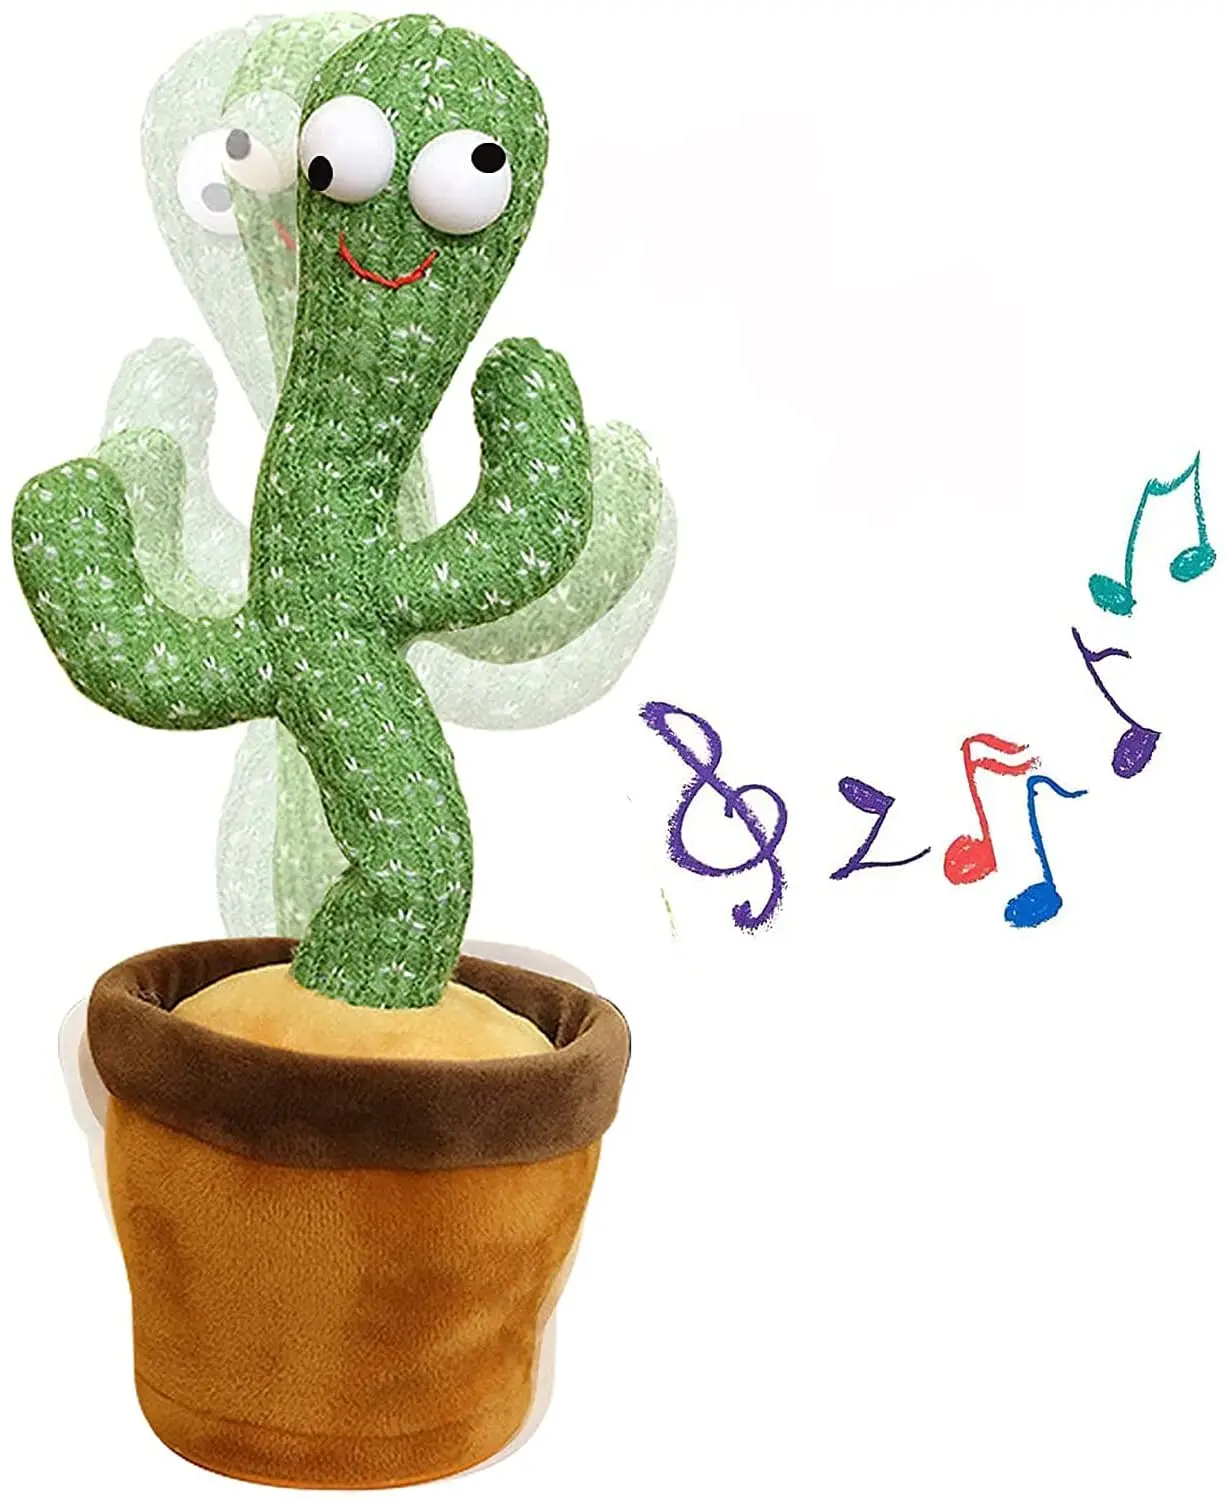 
Stuffed Toys Singing Kid Gifts Funny Dancing Cactus Plush Toys Children Toys With Music 